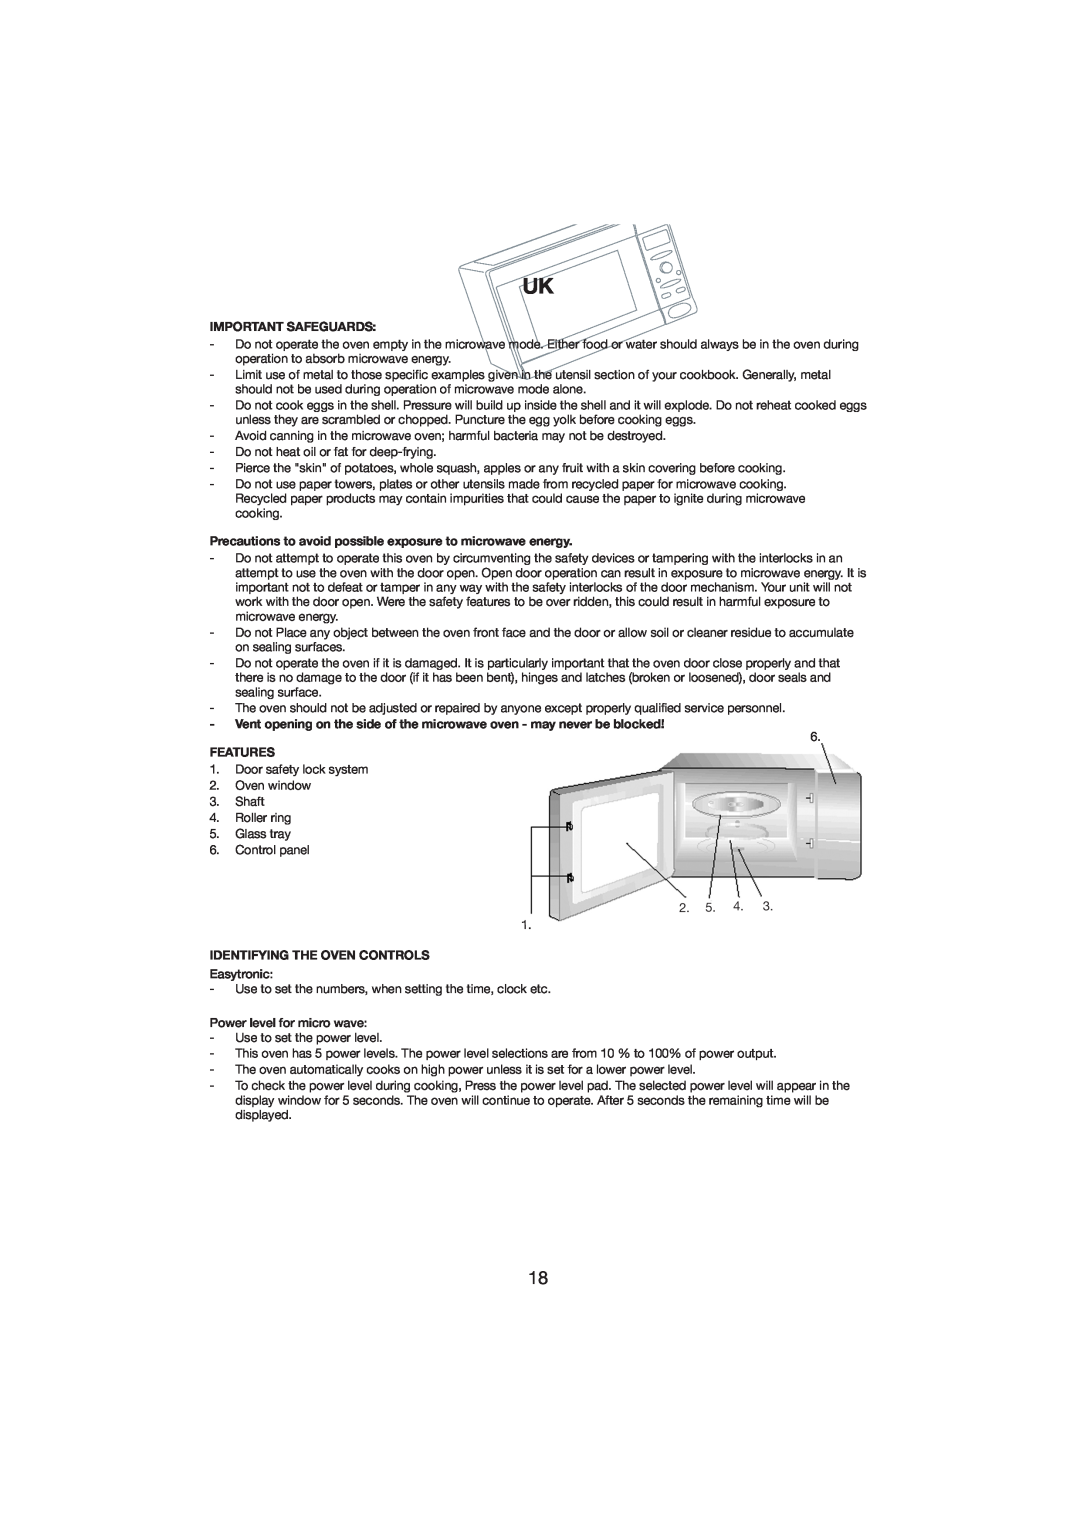 Melissa 253-001 manual Important Safeguards, Features, Identifying The Oven Controls 